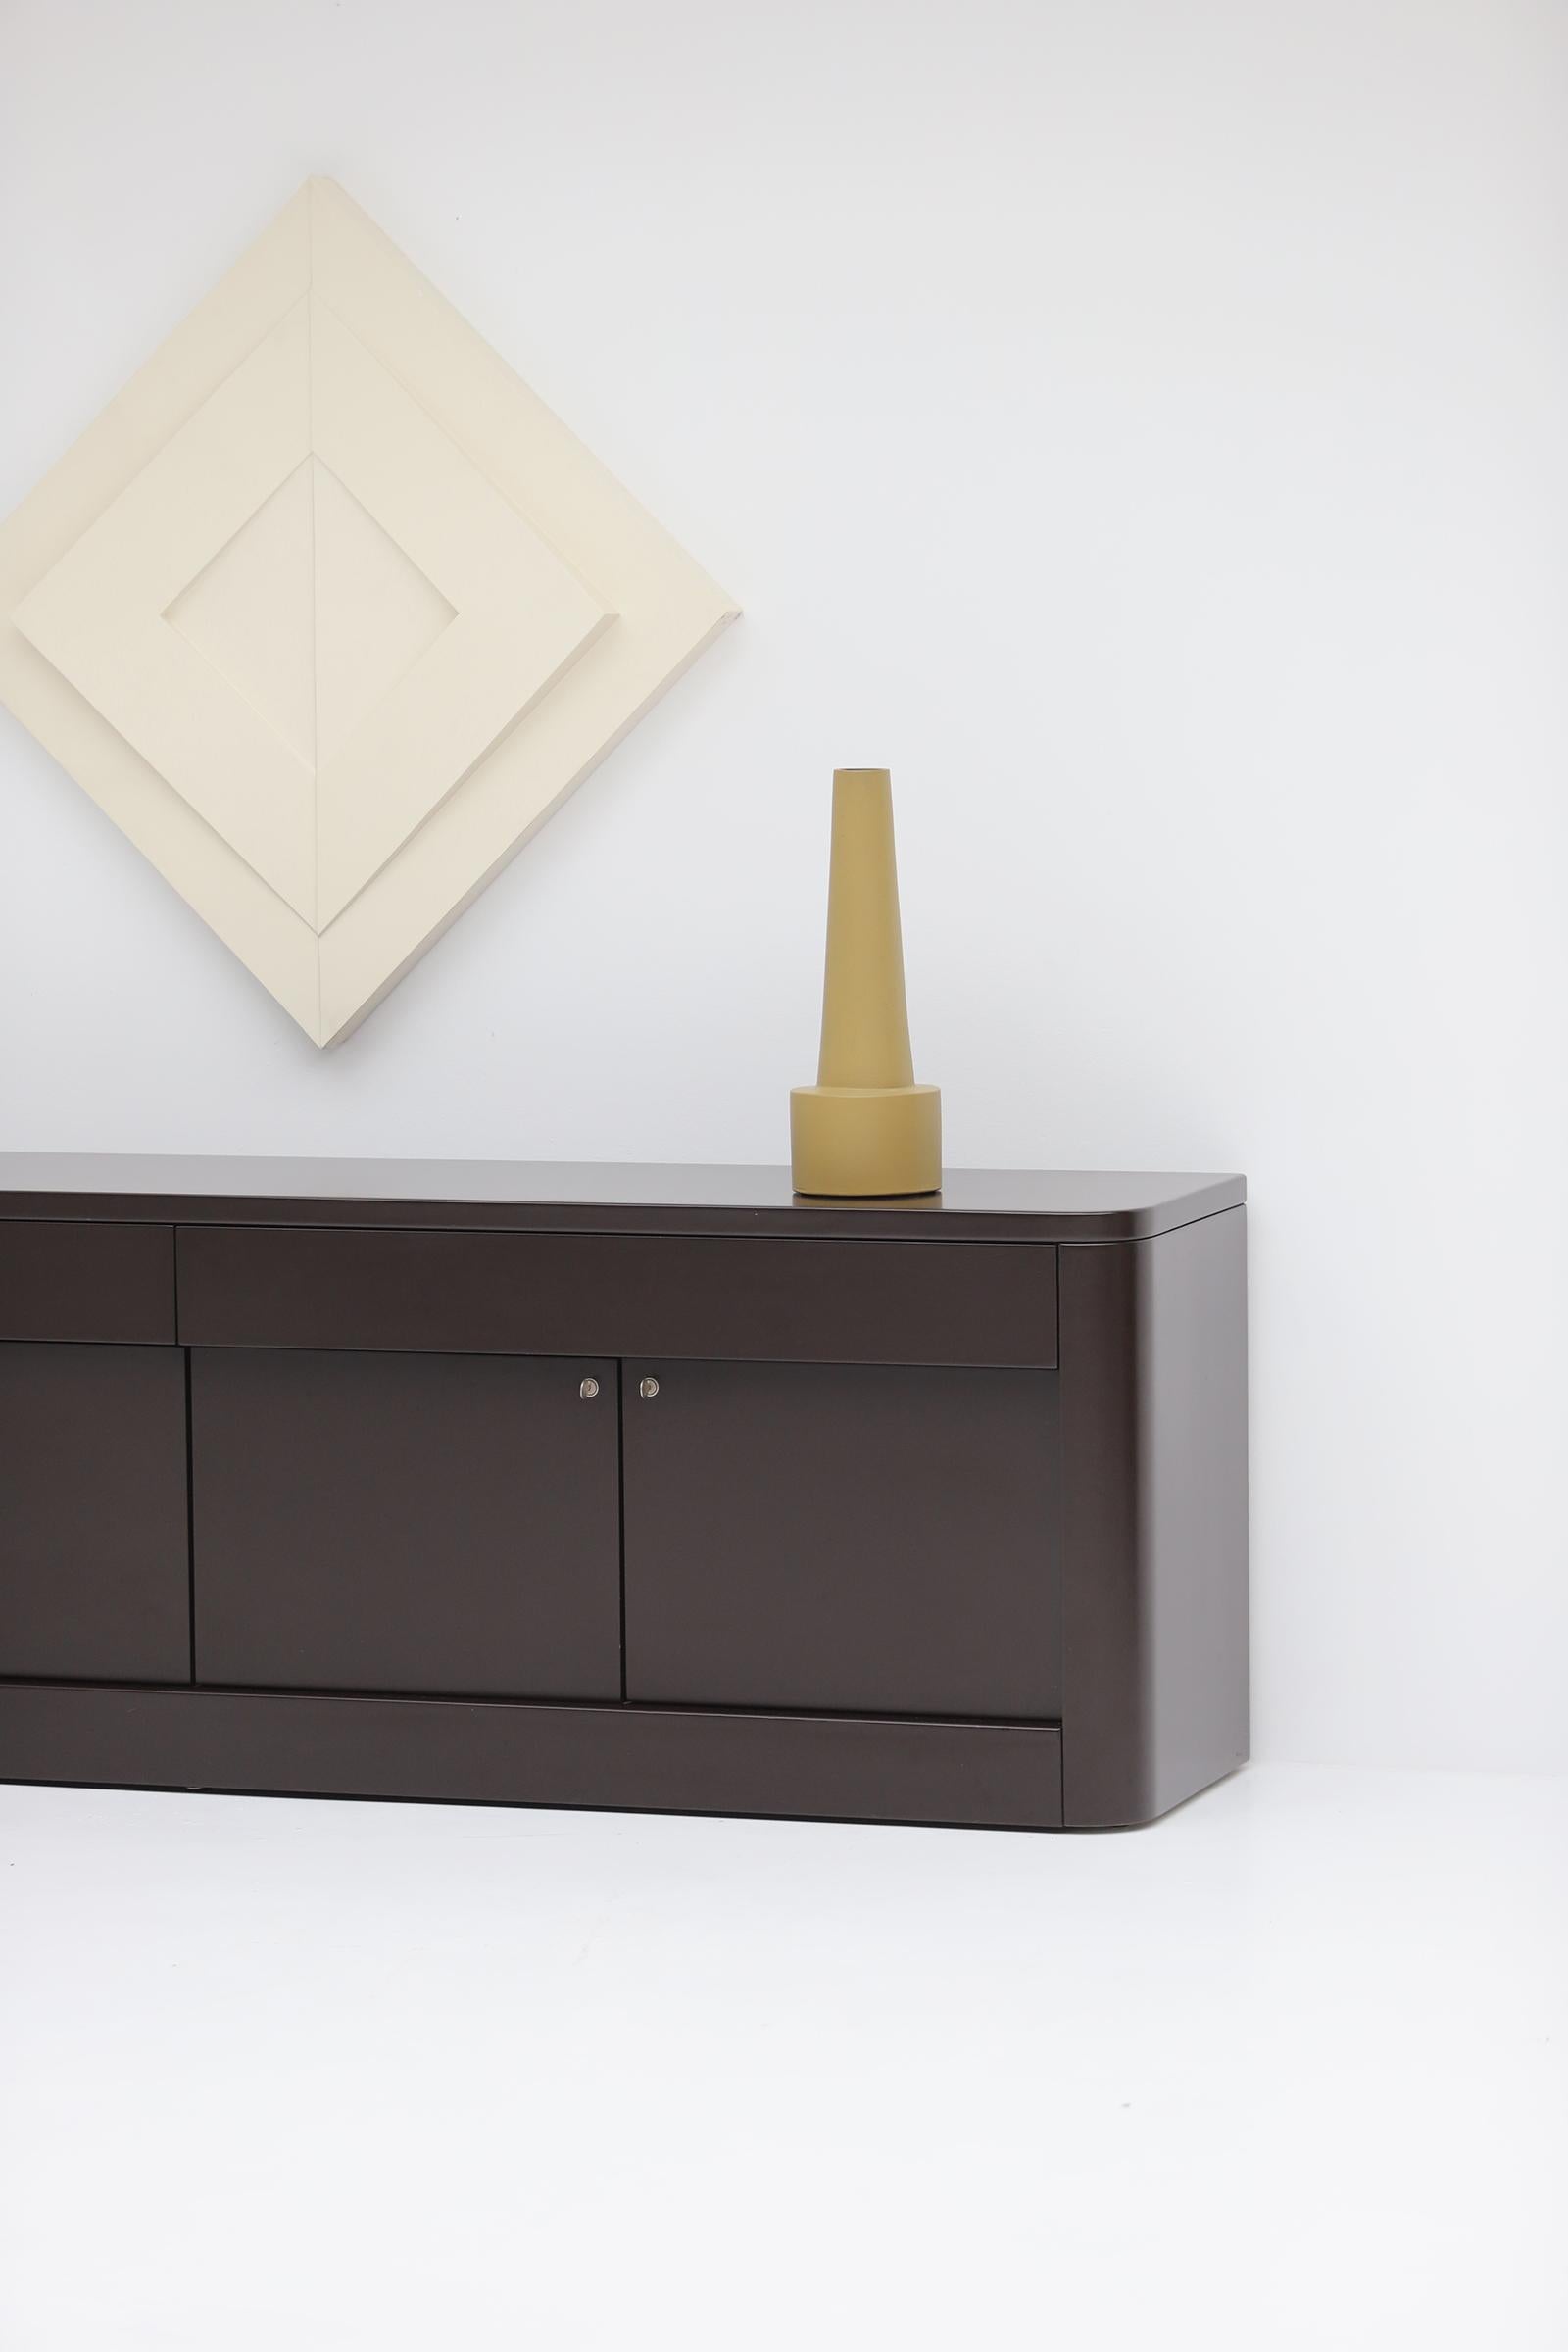 Lacquered Dark brown minimalist sideboard designed by Frank De Clercq in 1967